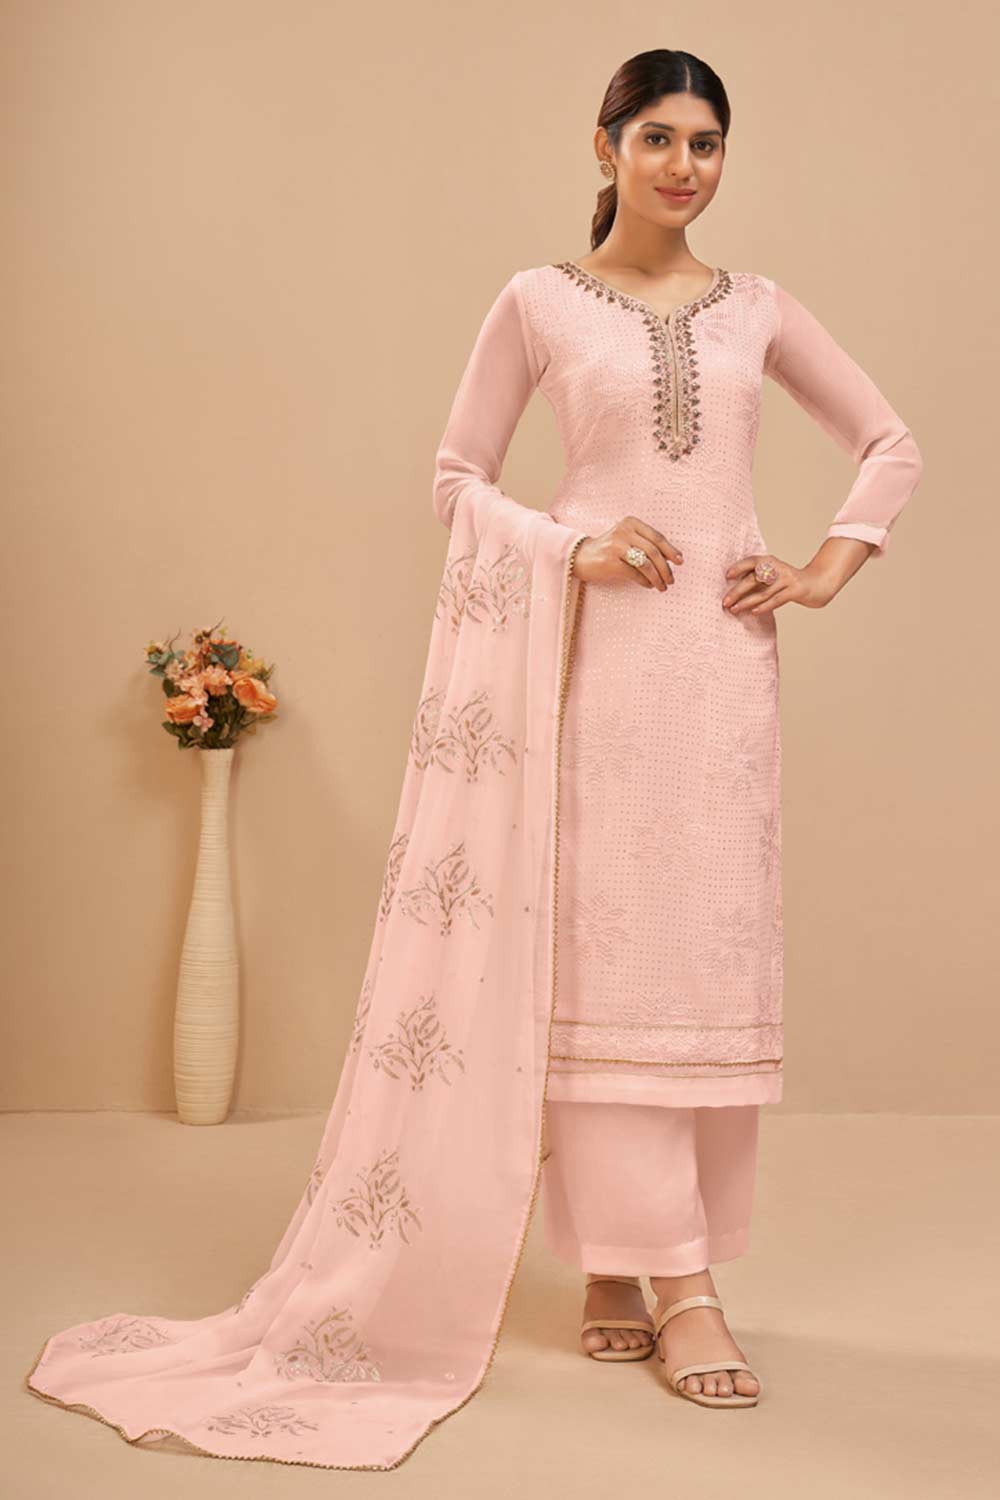 Buy Light Pink Georgette Embroidered Straight Kurta Suits Set Online - KARMAPLACE